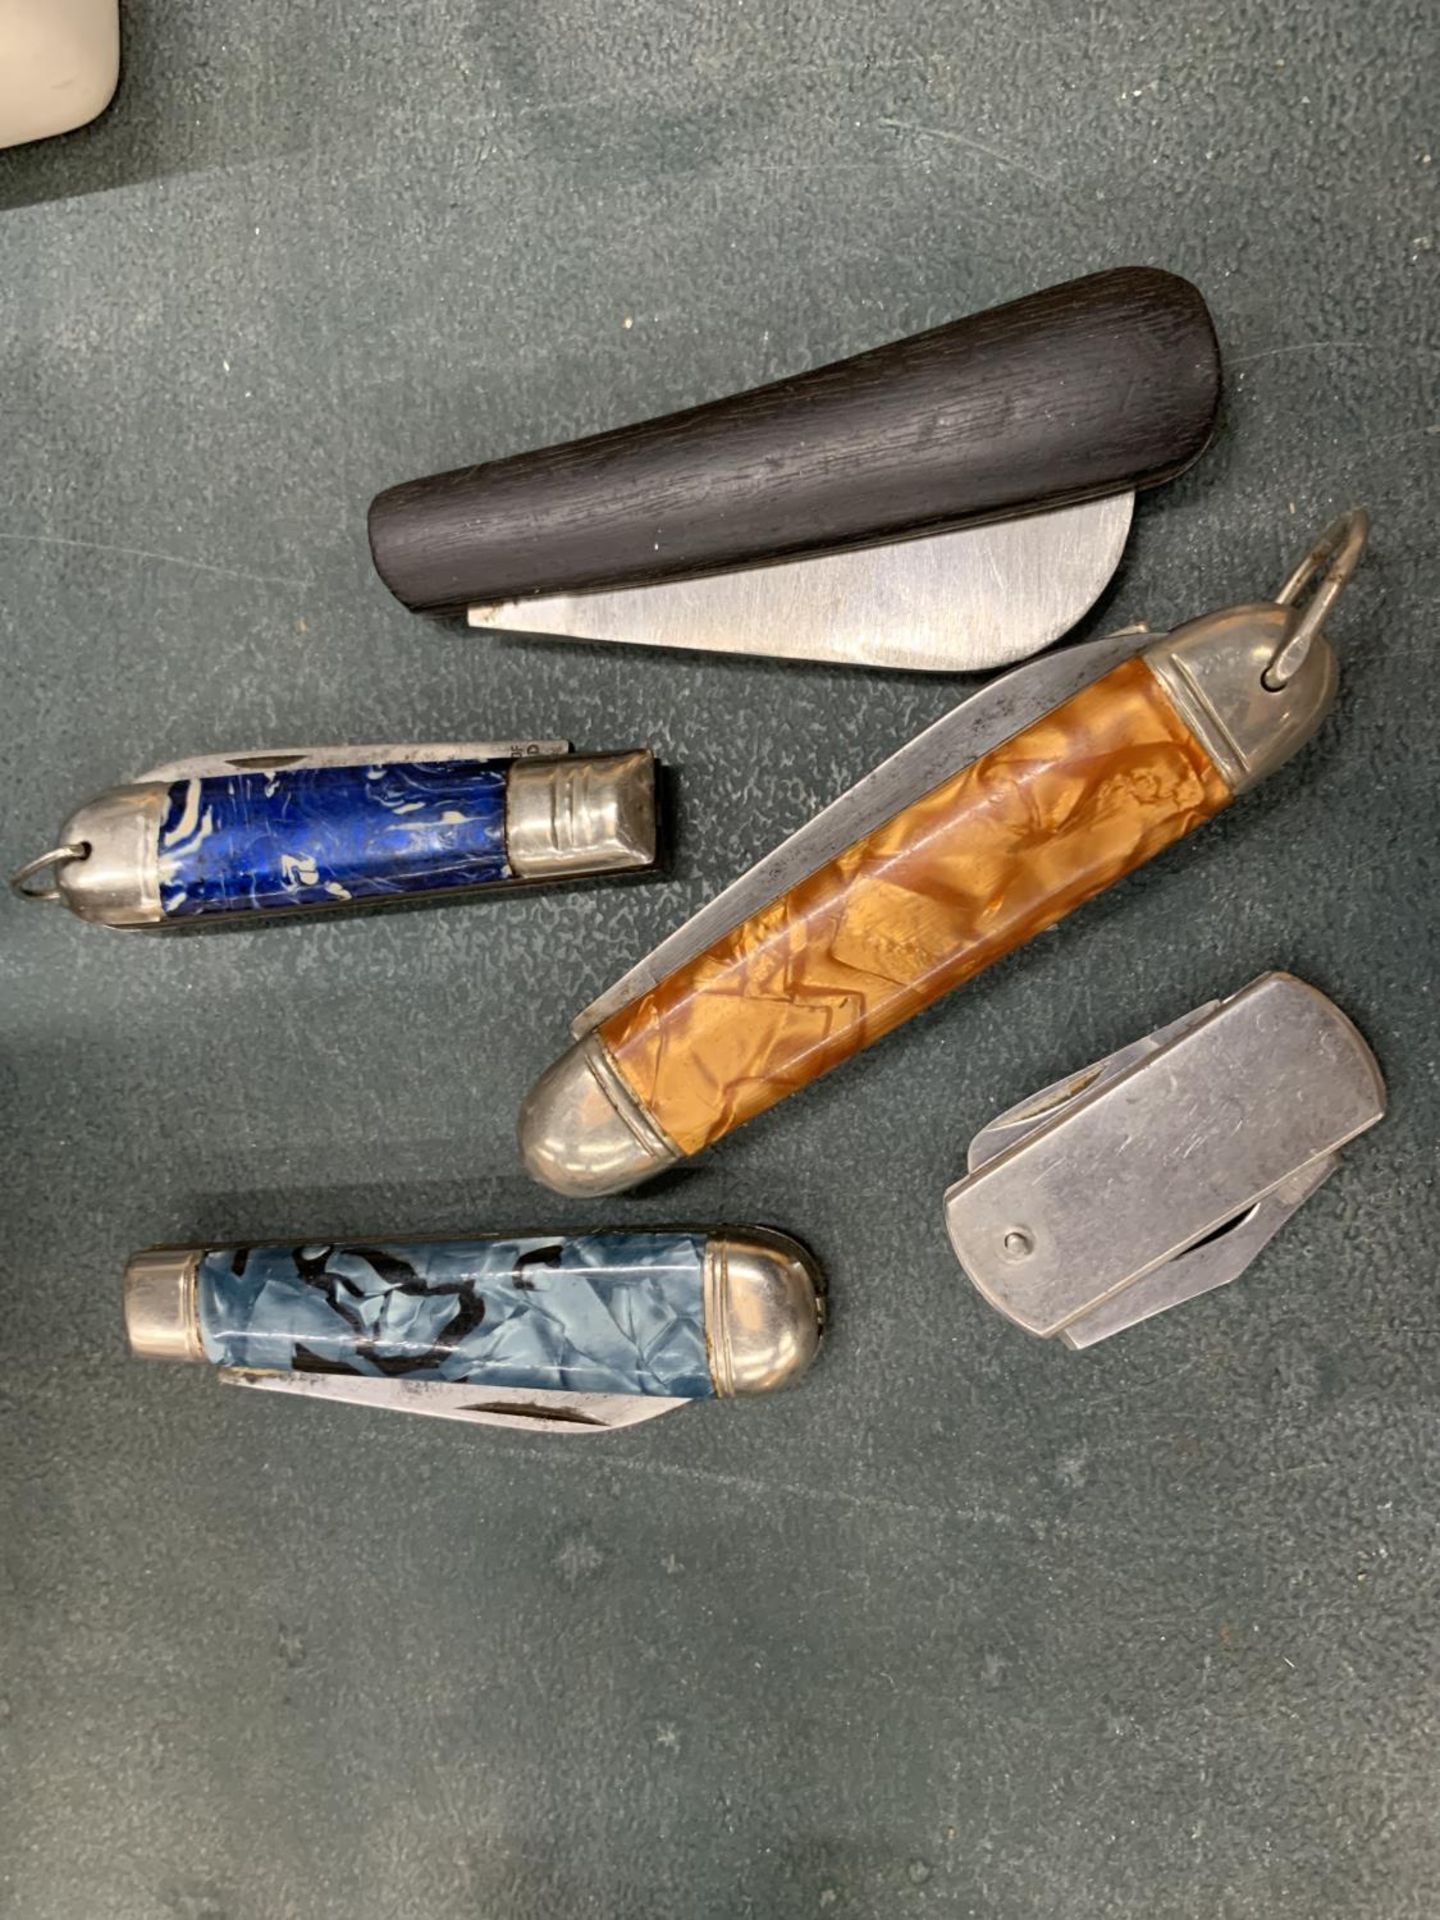 A QUANTITY OF VINTAGE PEN KNIVES - 5 IN TOTAL